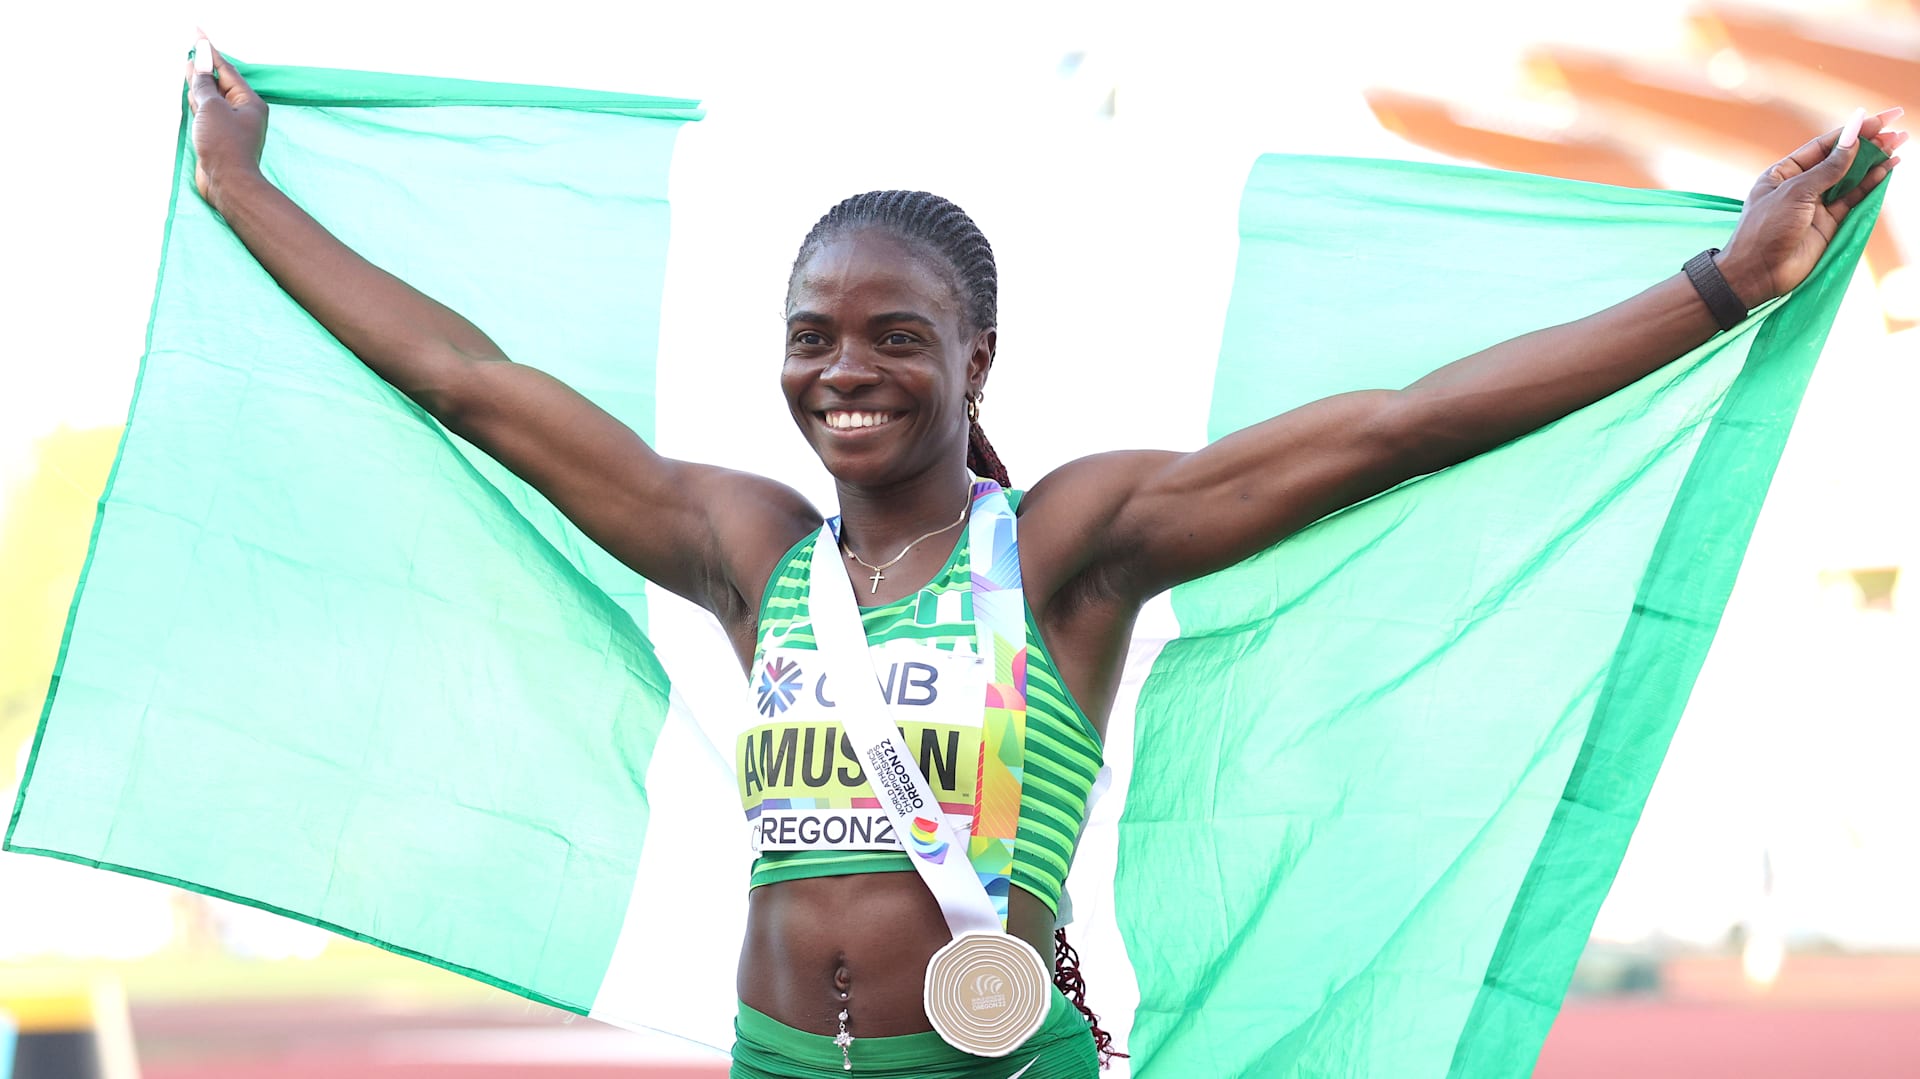 Top 10 African Female Athletes in 2022 - Part 1 - MAKING OF CHAMPIONS